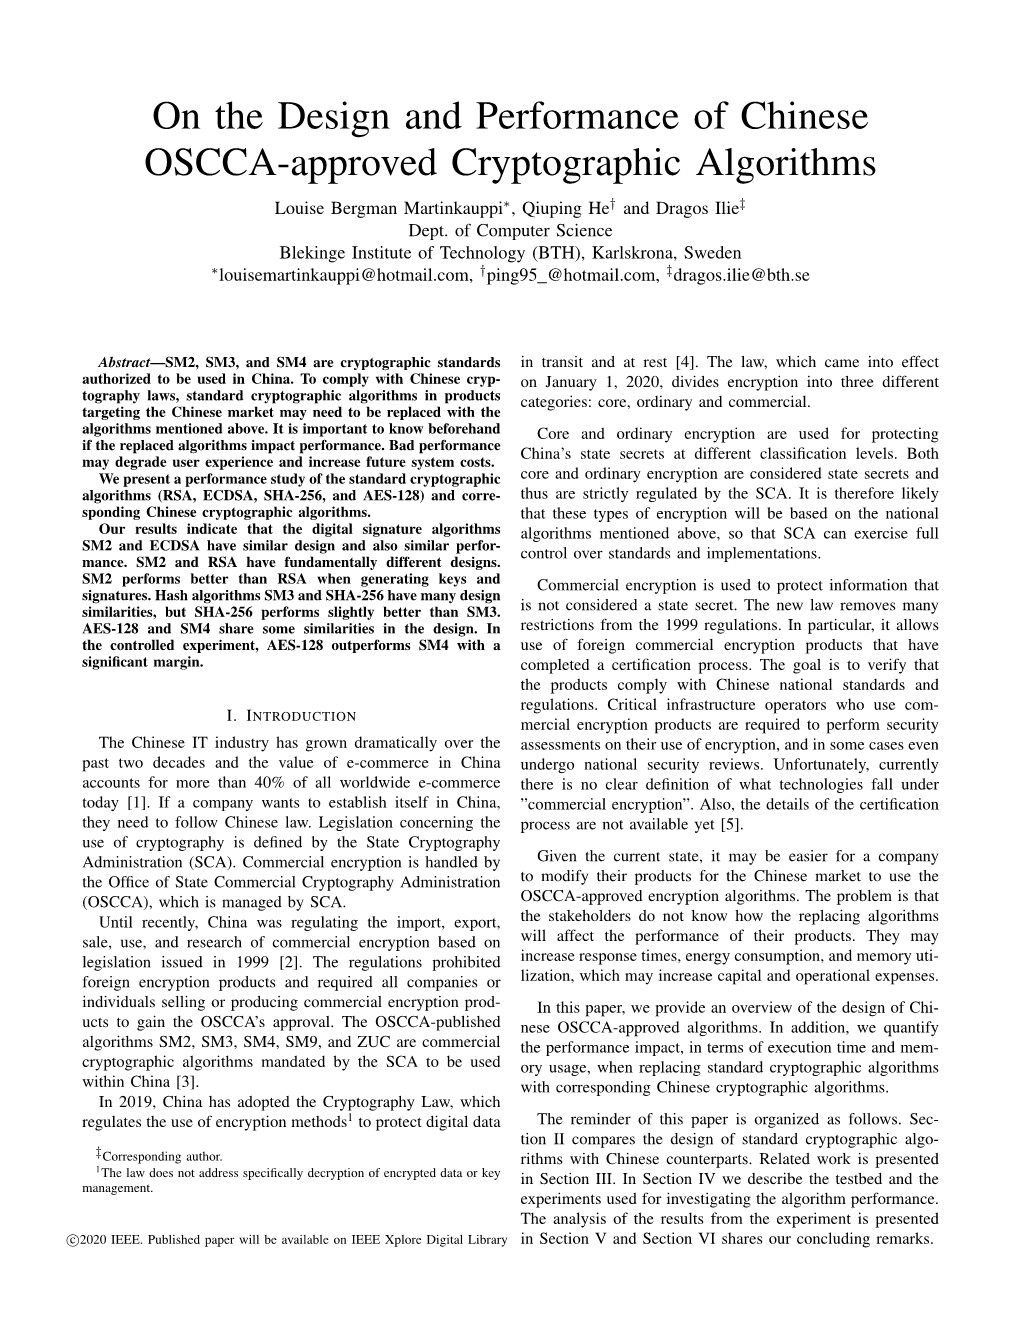 On the Design and Performance of Chinese OSCCA-Approved Cryptographic Algorithms Louise Bergman Martinkauppi∗, Qiuping He† and Dragos Ilie‡ Dept